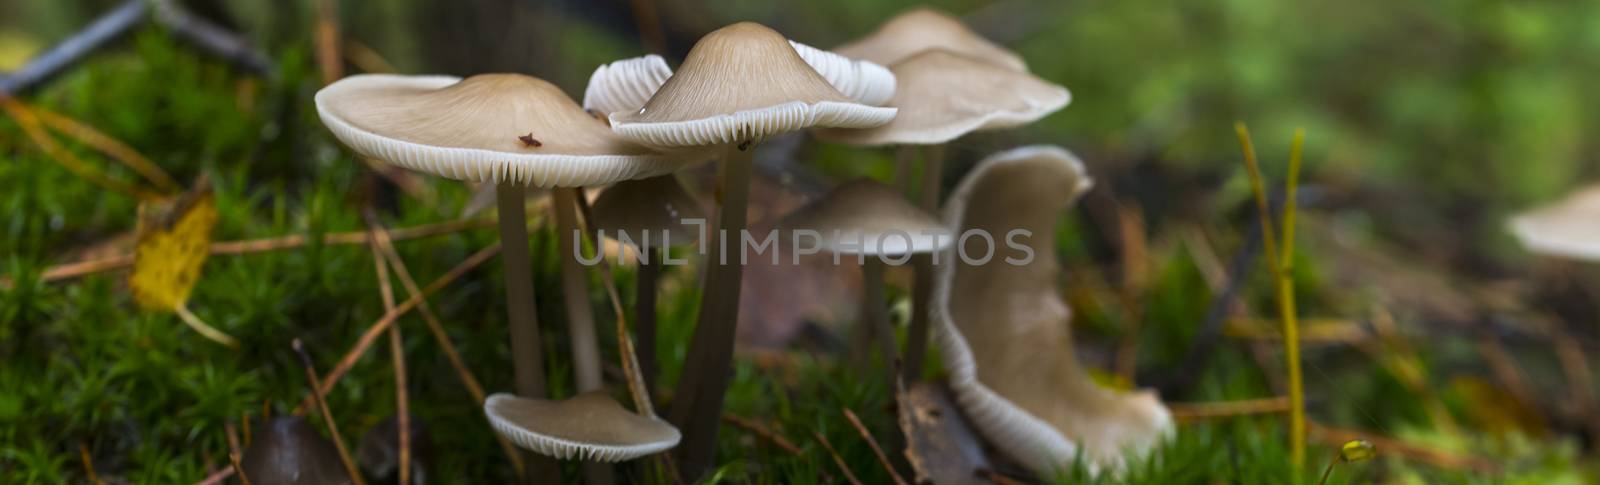 fungus on green moss during autumn by compuinfoto